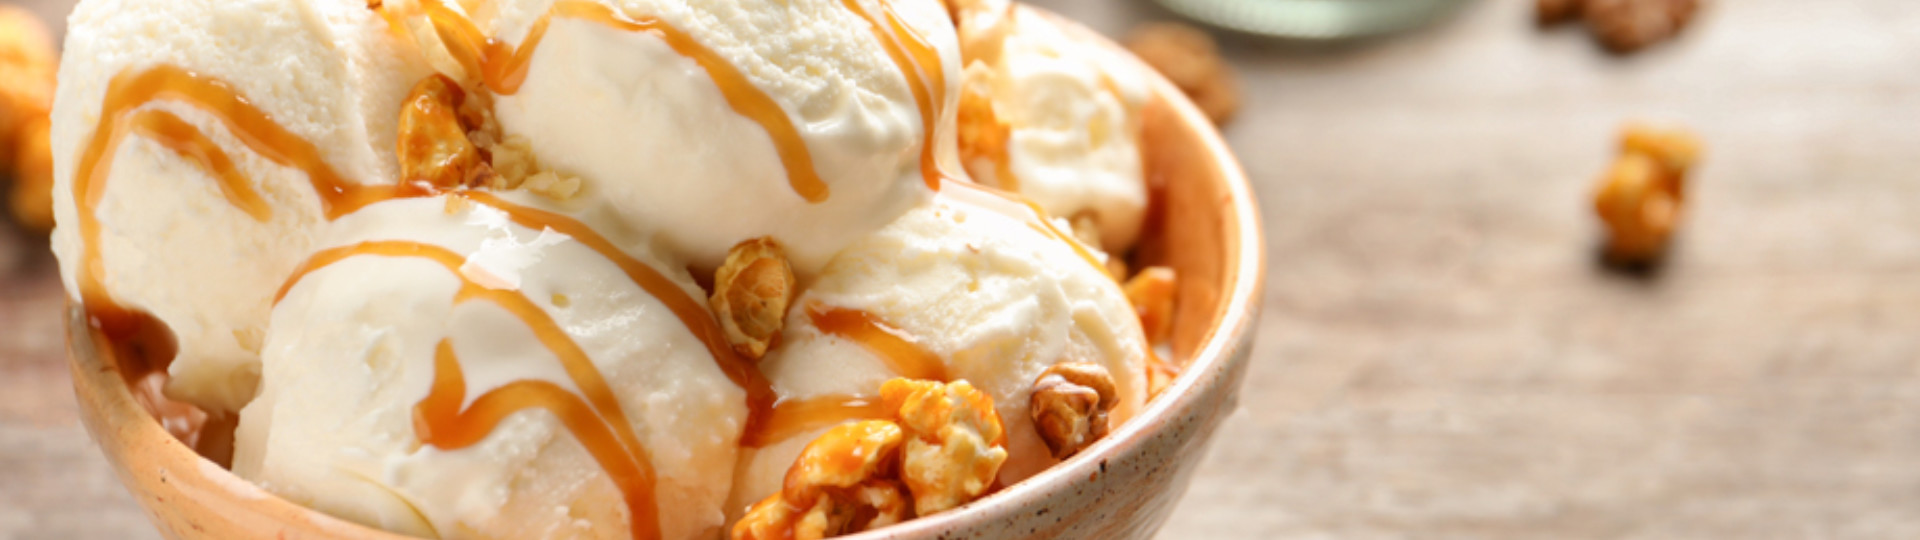 icecream with caramel drizzle in bowl